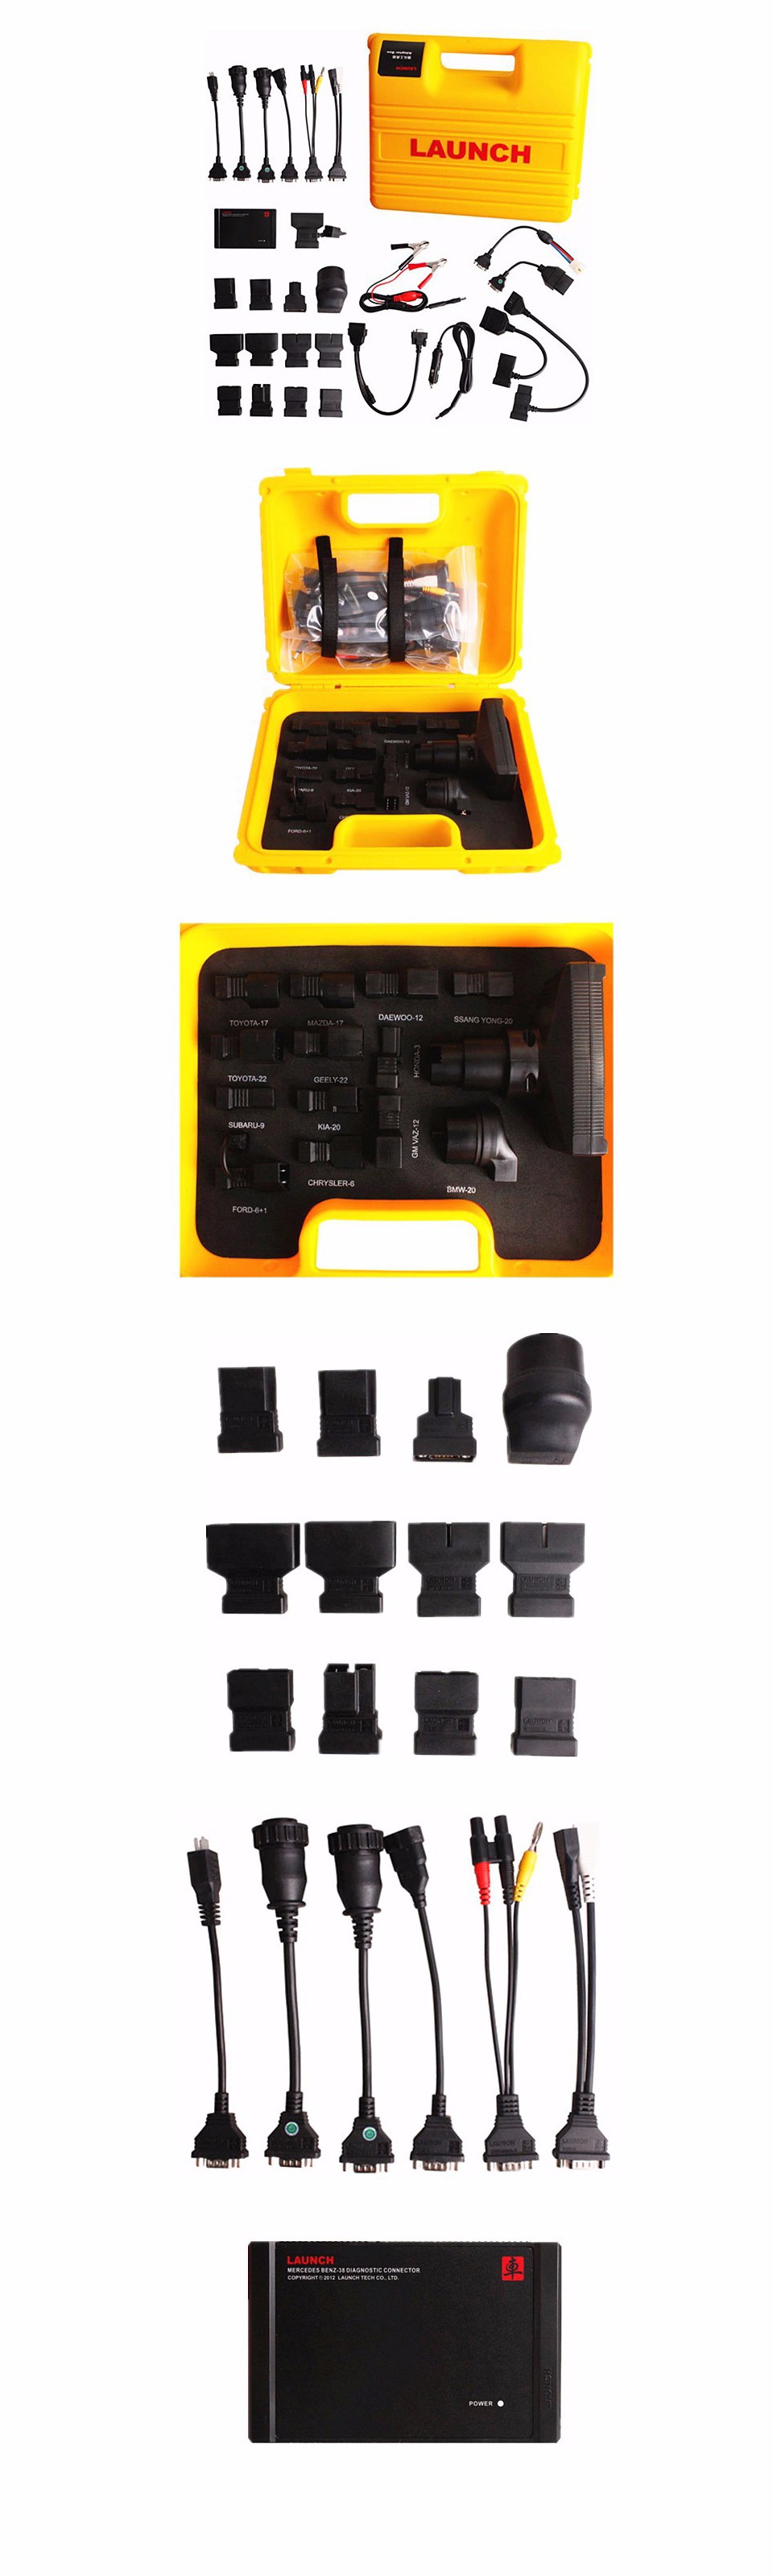 Super-Quality-Original-Launch-X431-iDiag-Connector-Set-Package-hot-sell-x-431-idiag-auto-diag-1